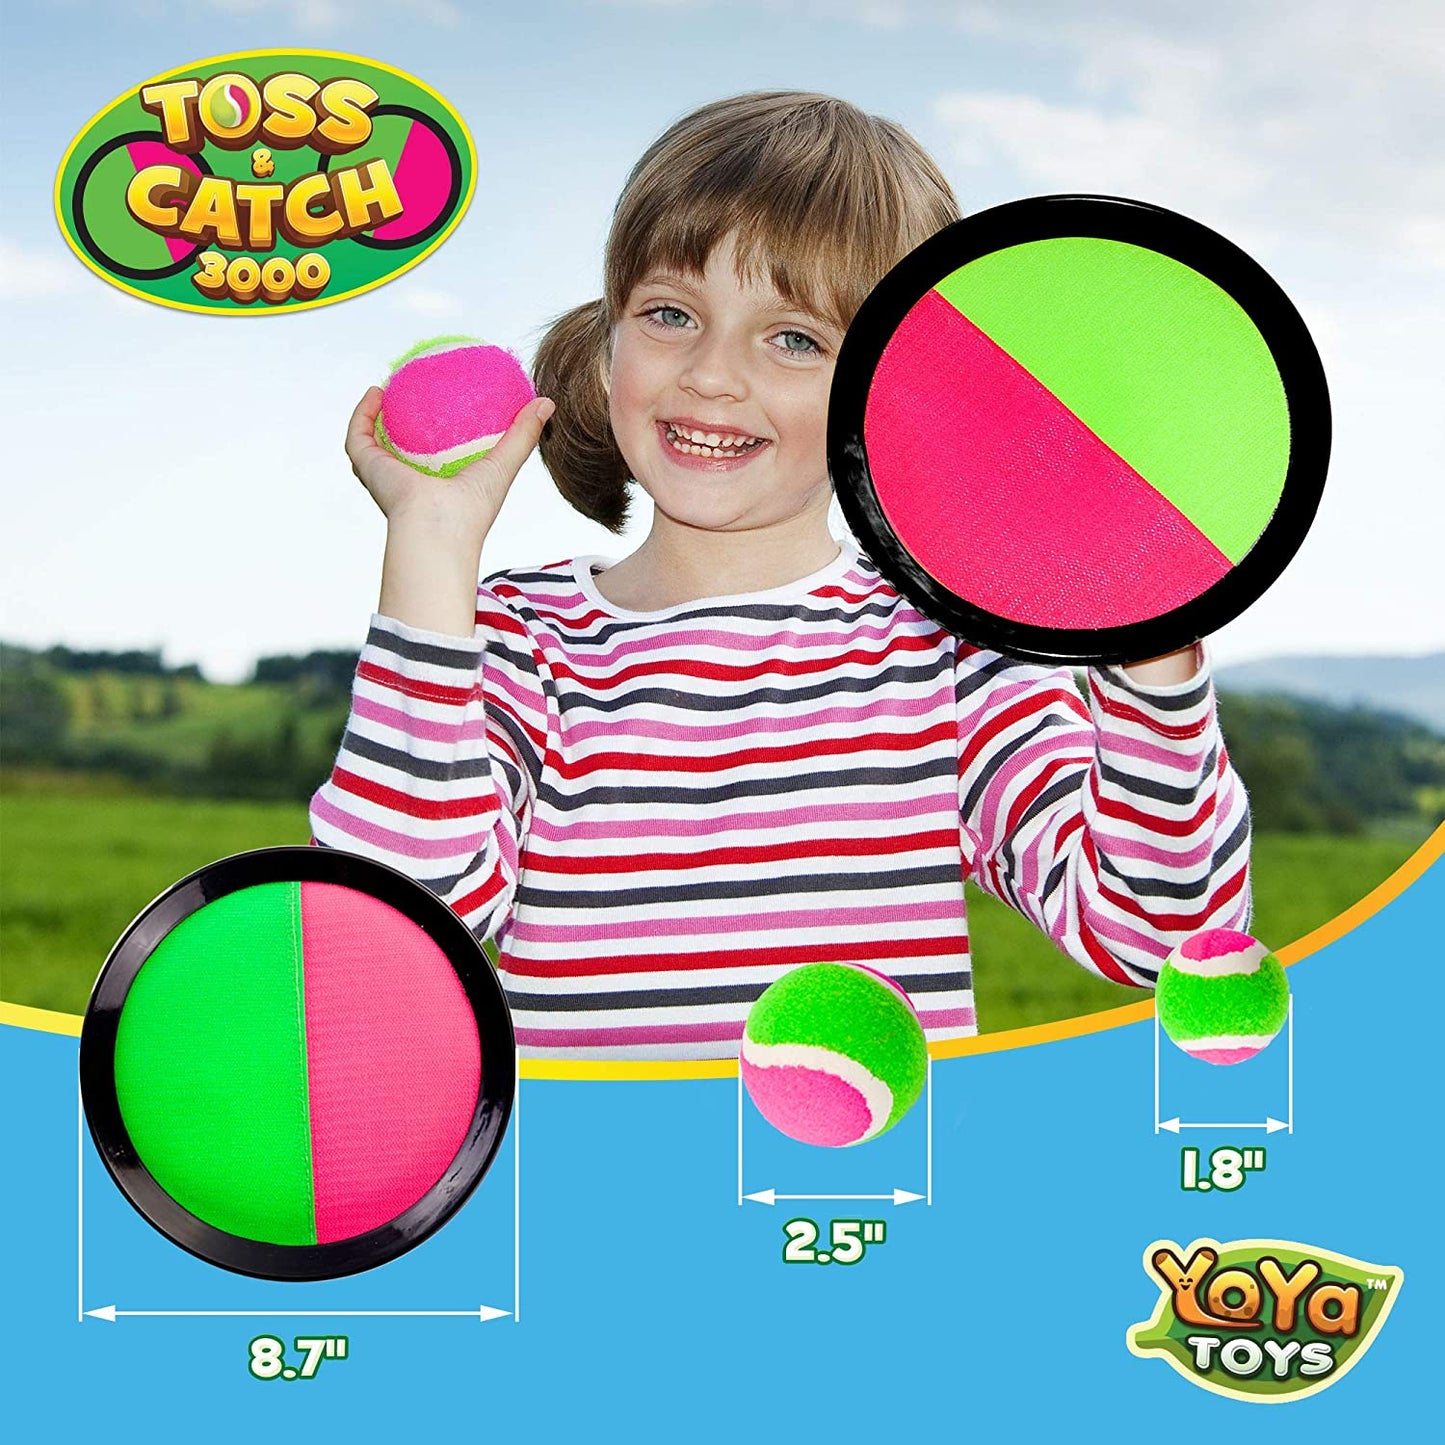 YoYa Toys Toss and Catch 3000 Ball Game with Disc Paddles, 2 Balls (Big and Small) and PVC Carry Bag, Pink and Green - (For 8 piece(s))